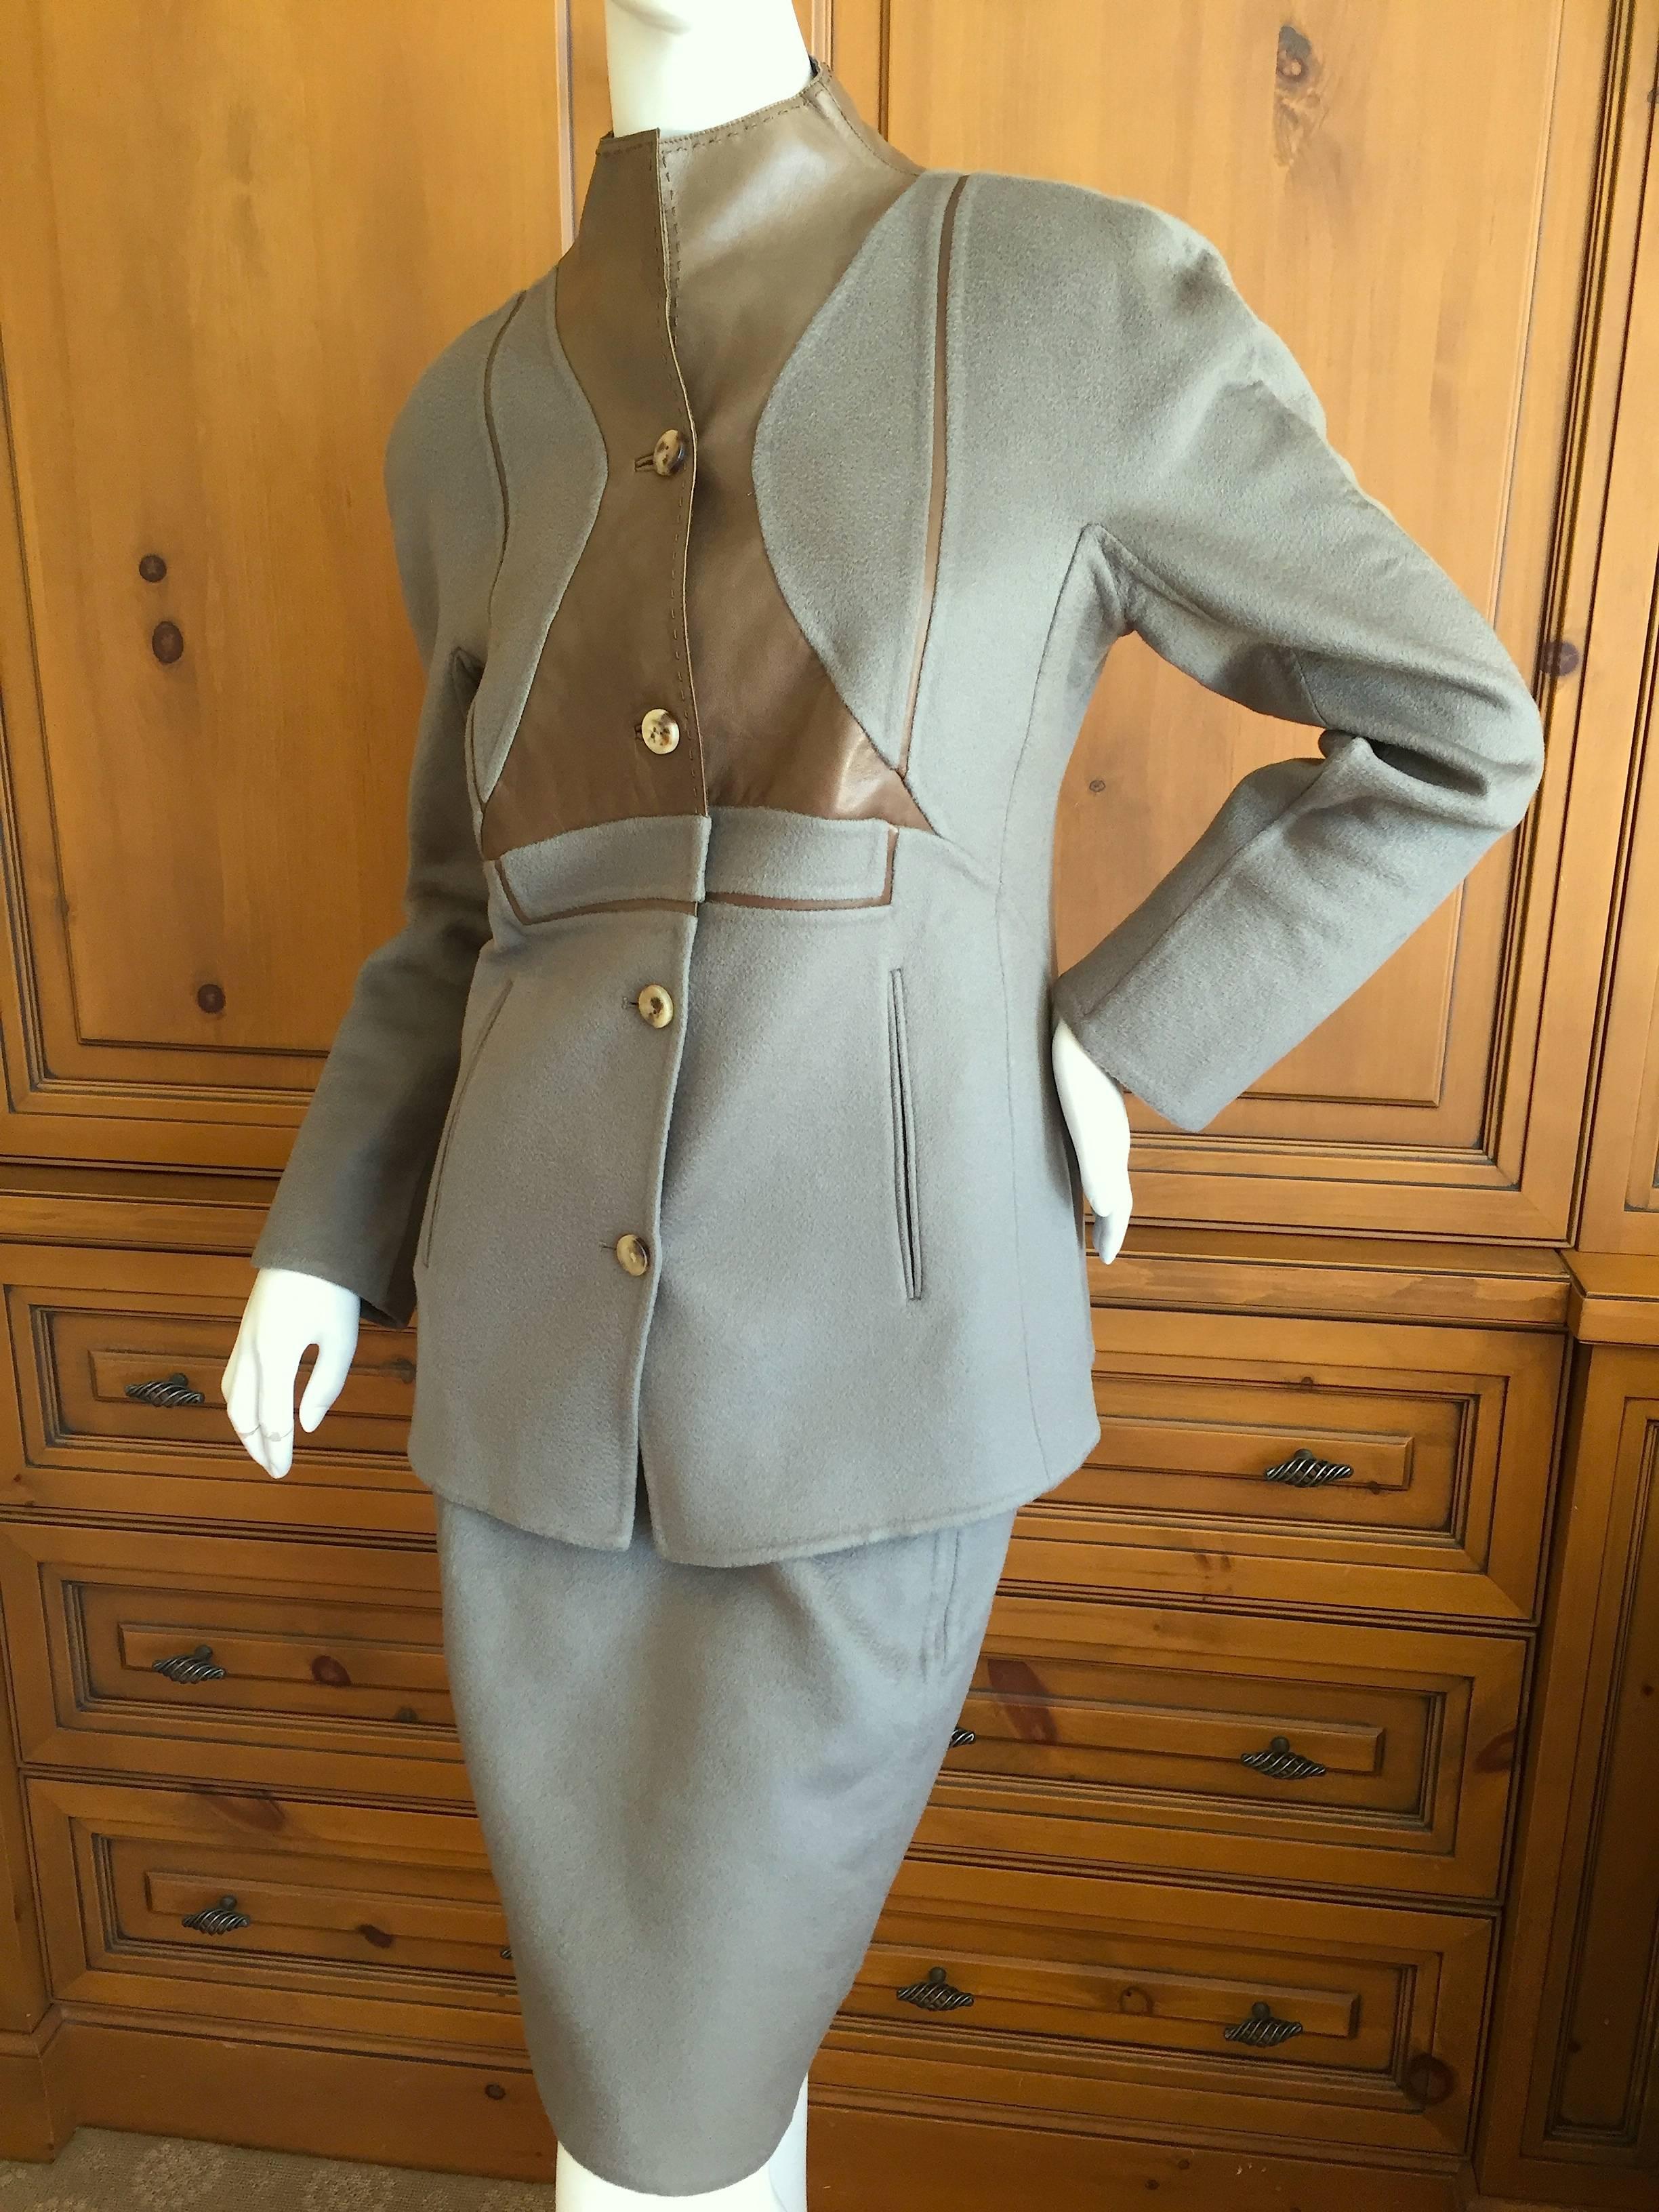 Chado Ralph Rucci Pure Cashmere & Leather Suit  In Excellent Condition For Sale In Cloverdale, CA